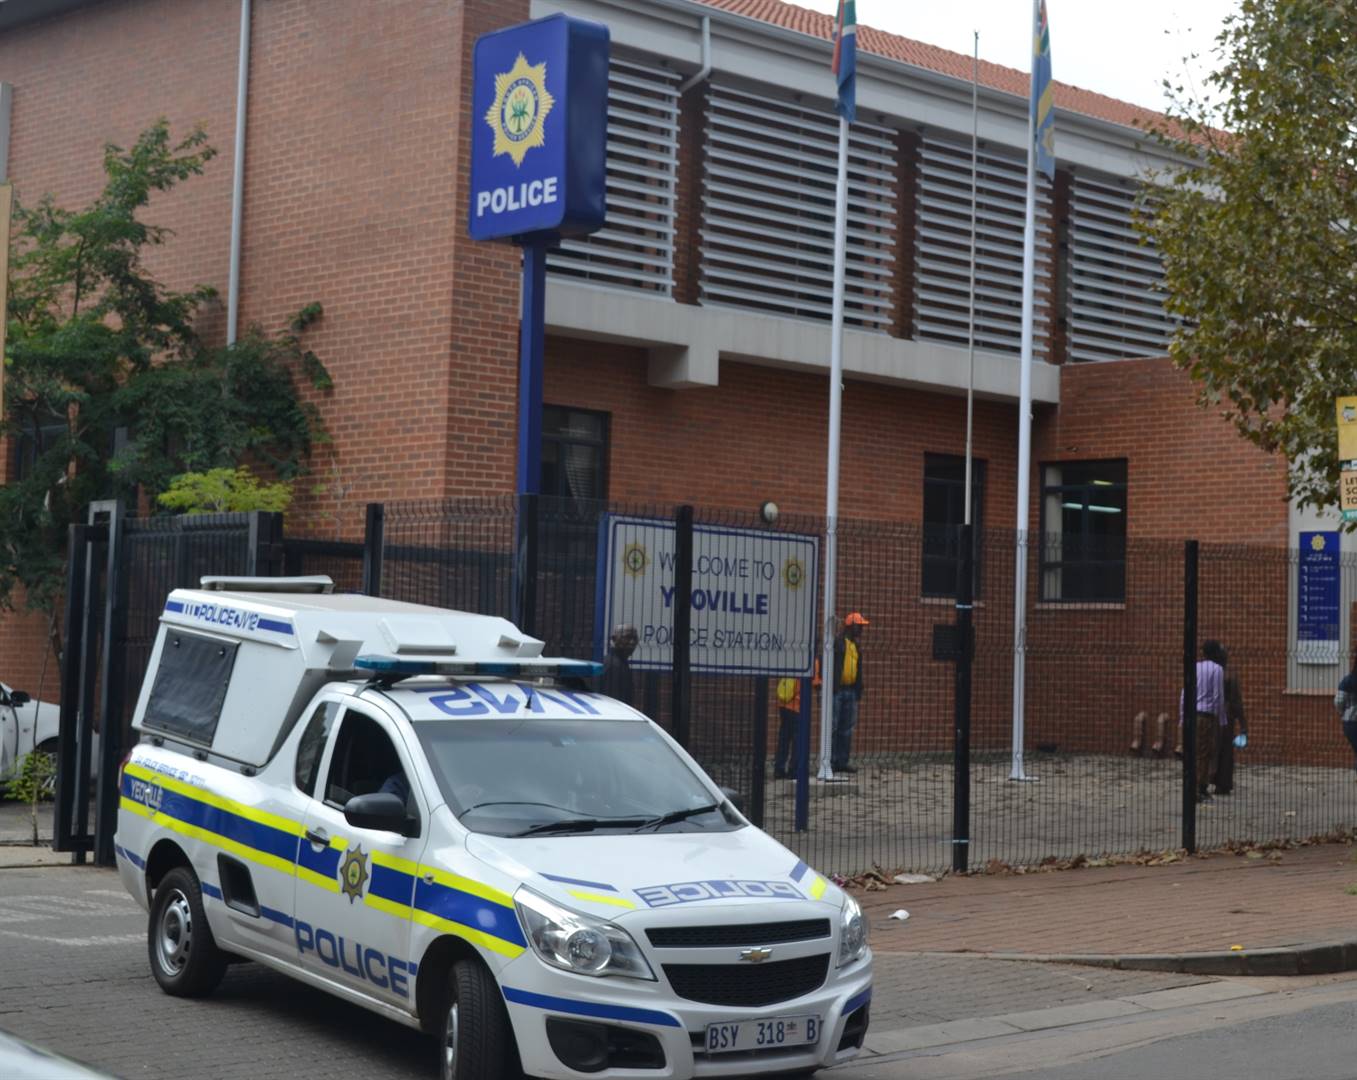 The Yeoville police station had an oversight inspection conducted by the Democratic Alliance following allegations that illegal immigrants who have been arrested pay a bribe in exchange of being released. Picture: Palesa Dlamini/City Press